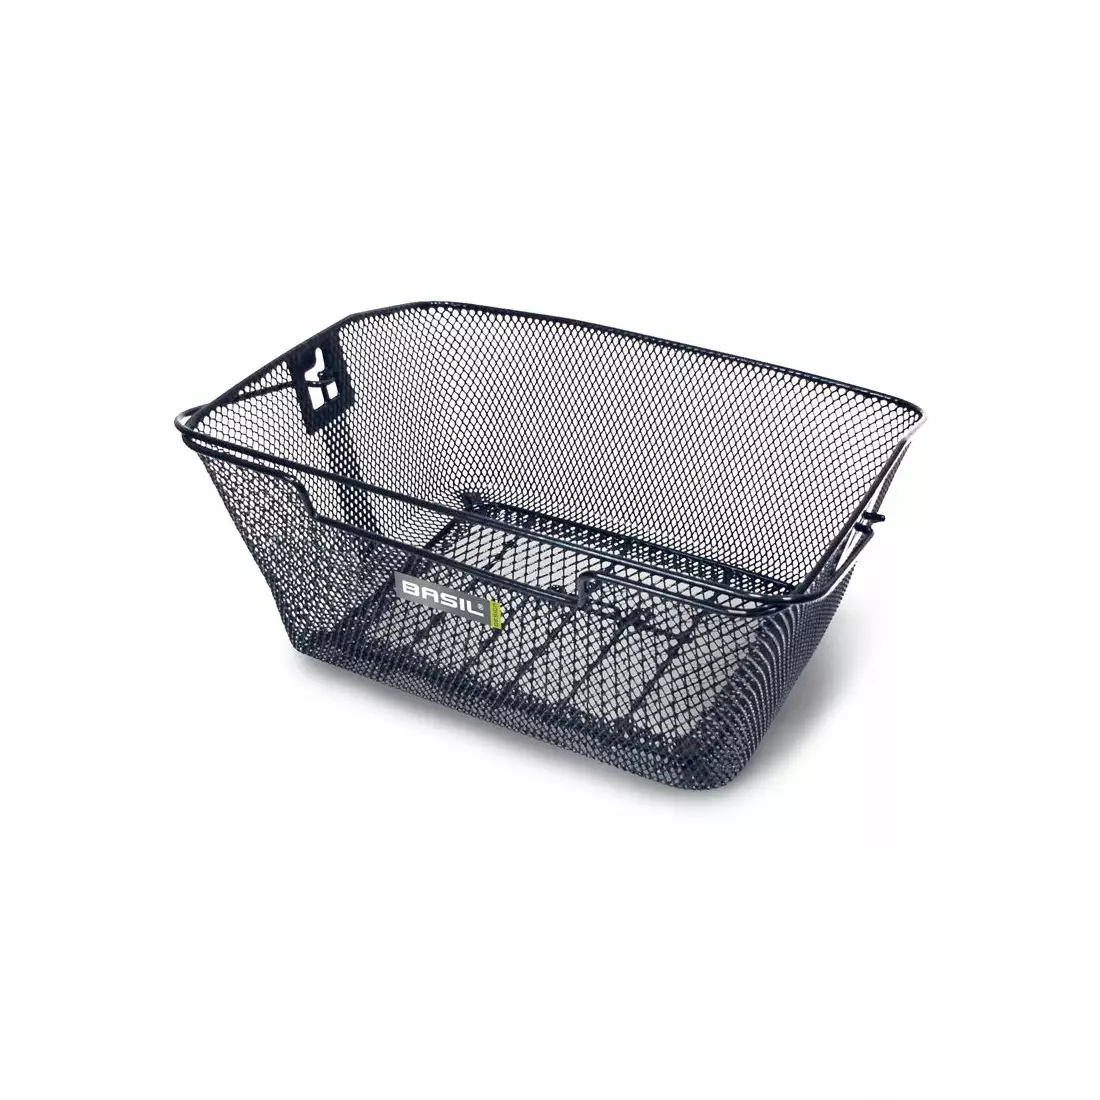 BASIL CAPRI bicycle basket for the rear carrier + fixing hooks, steel black BAS-11001